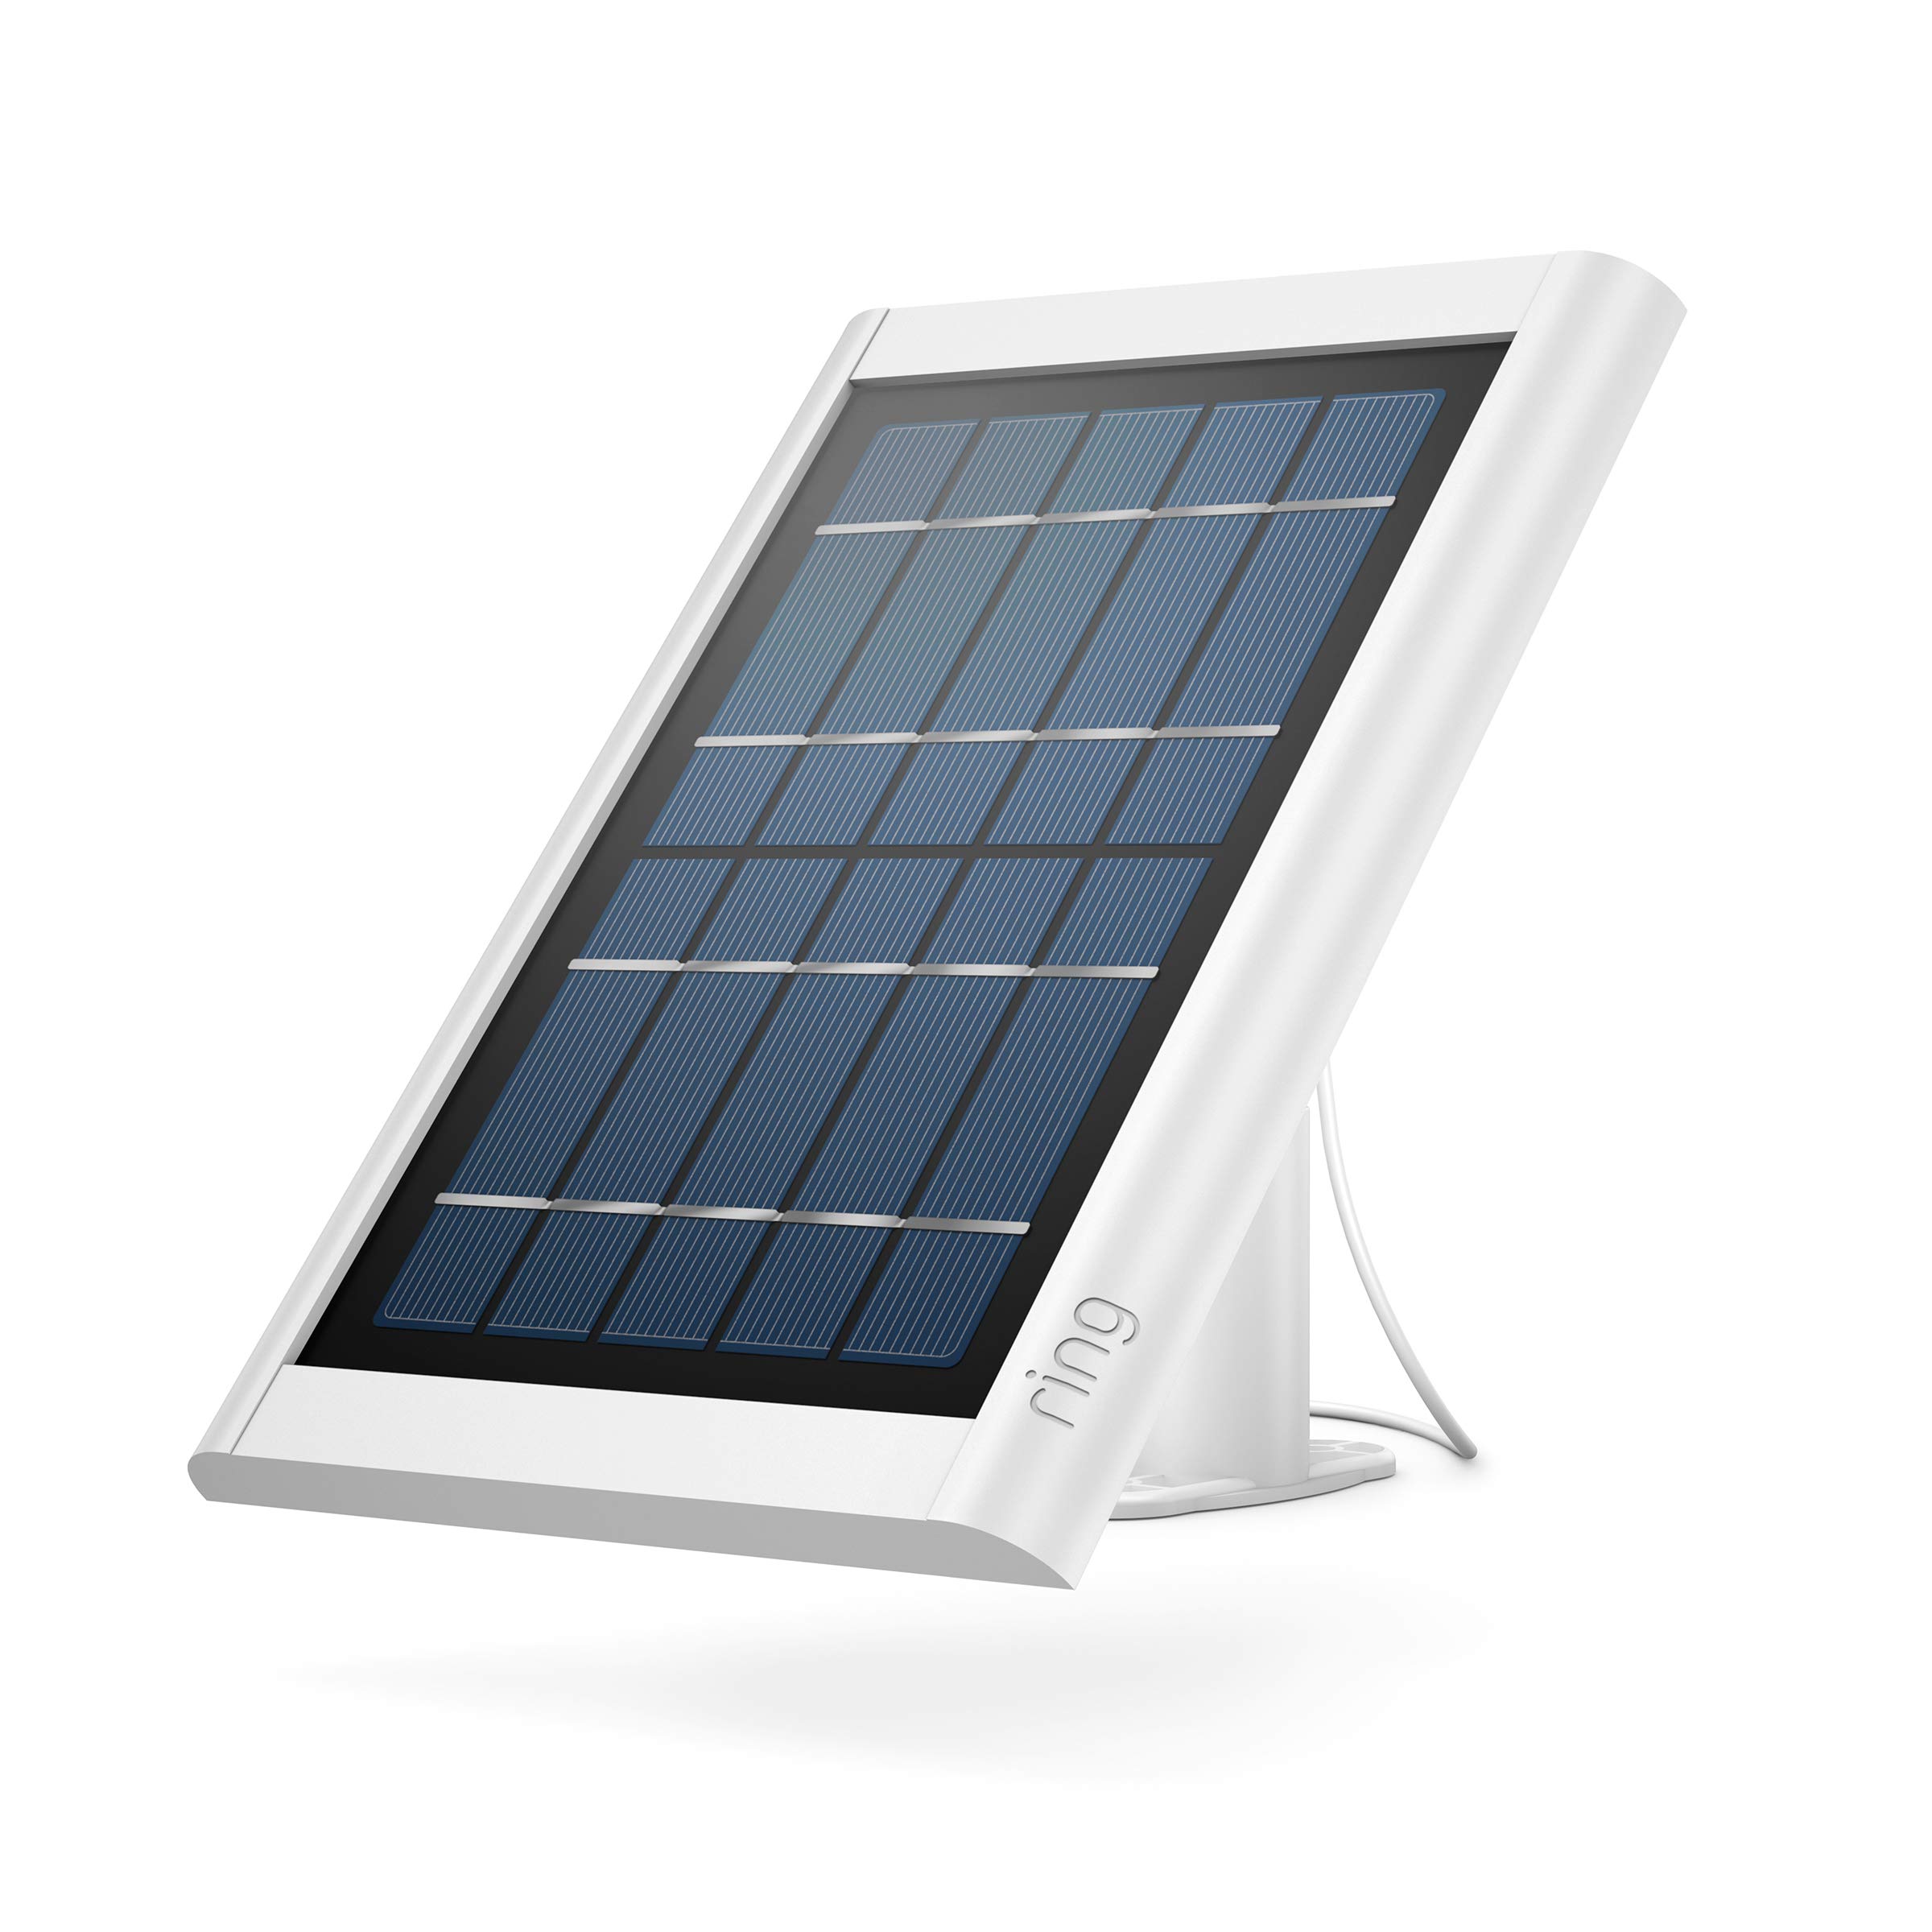 Ring Super Solar Panel – White $79.99 new on Woot (Prime exclusive)